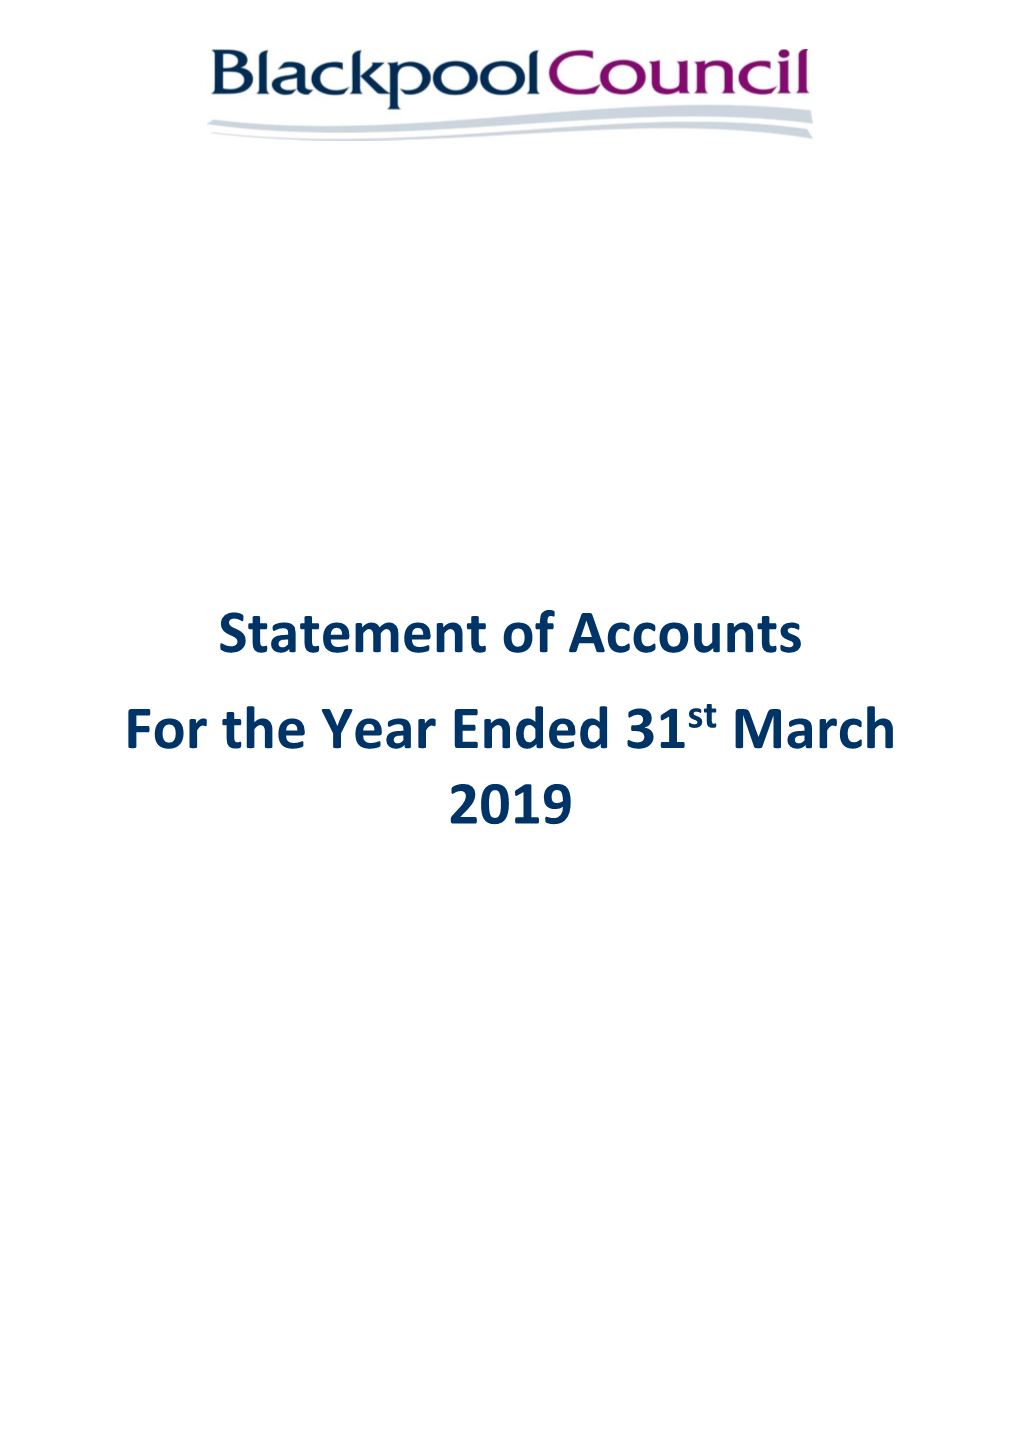 Audited Statement of Accounts 2018-19